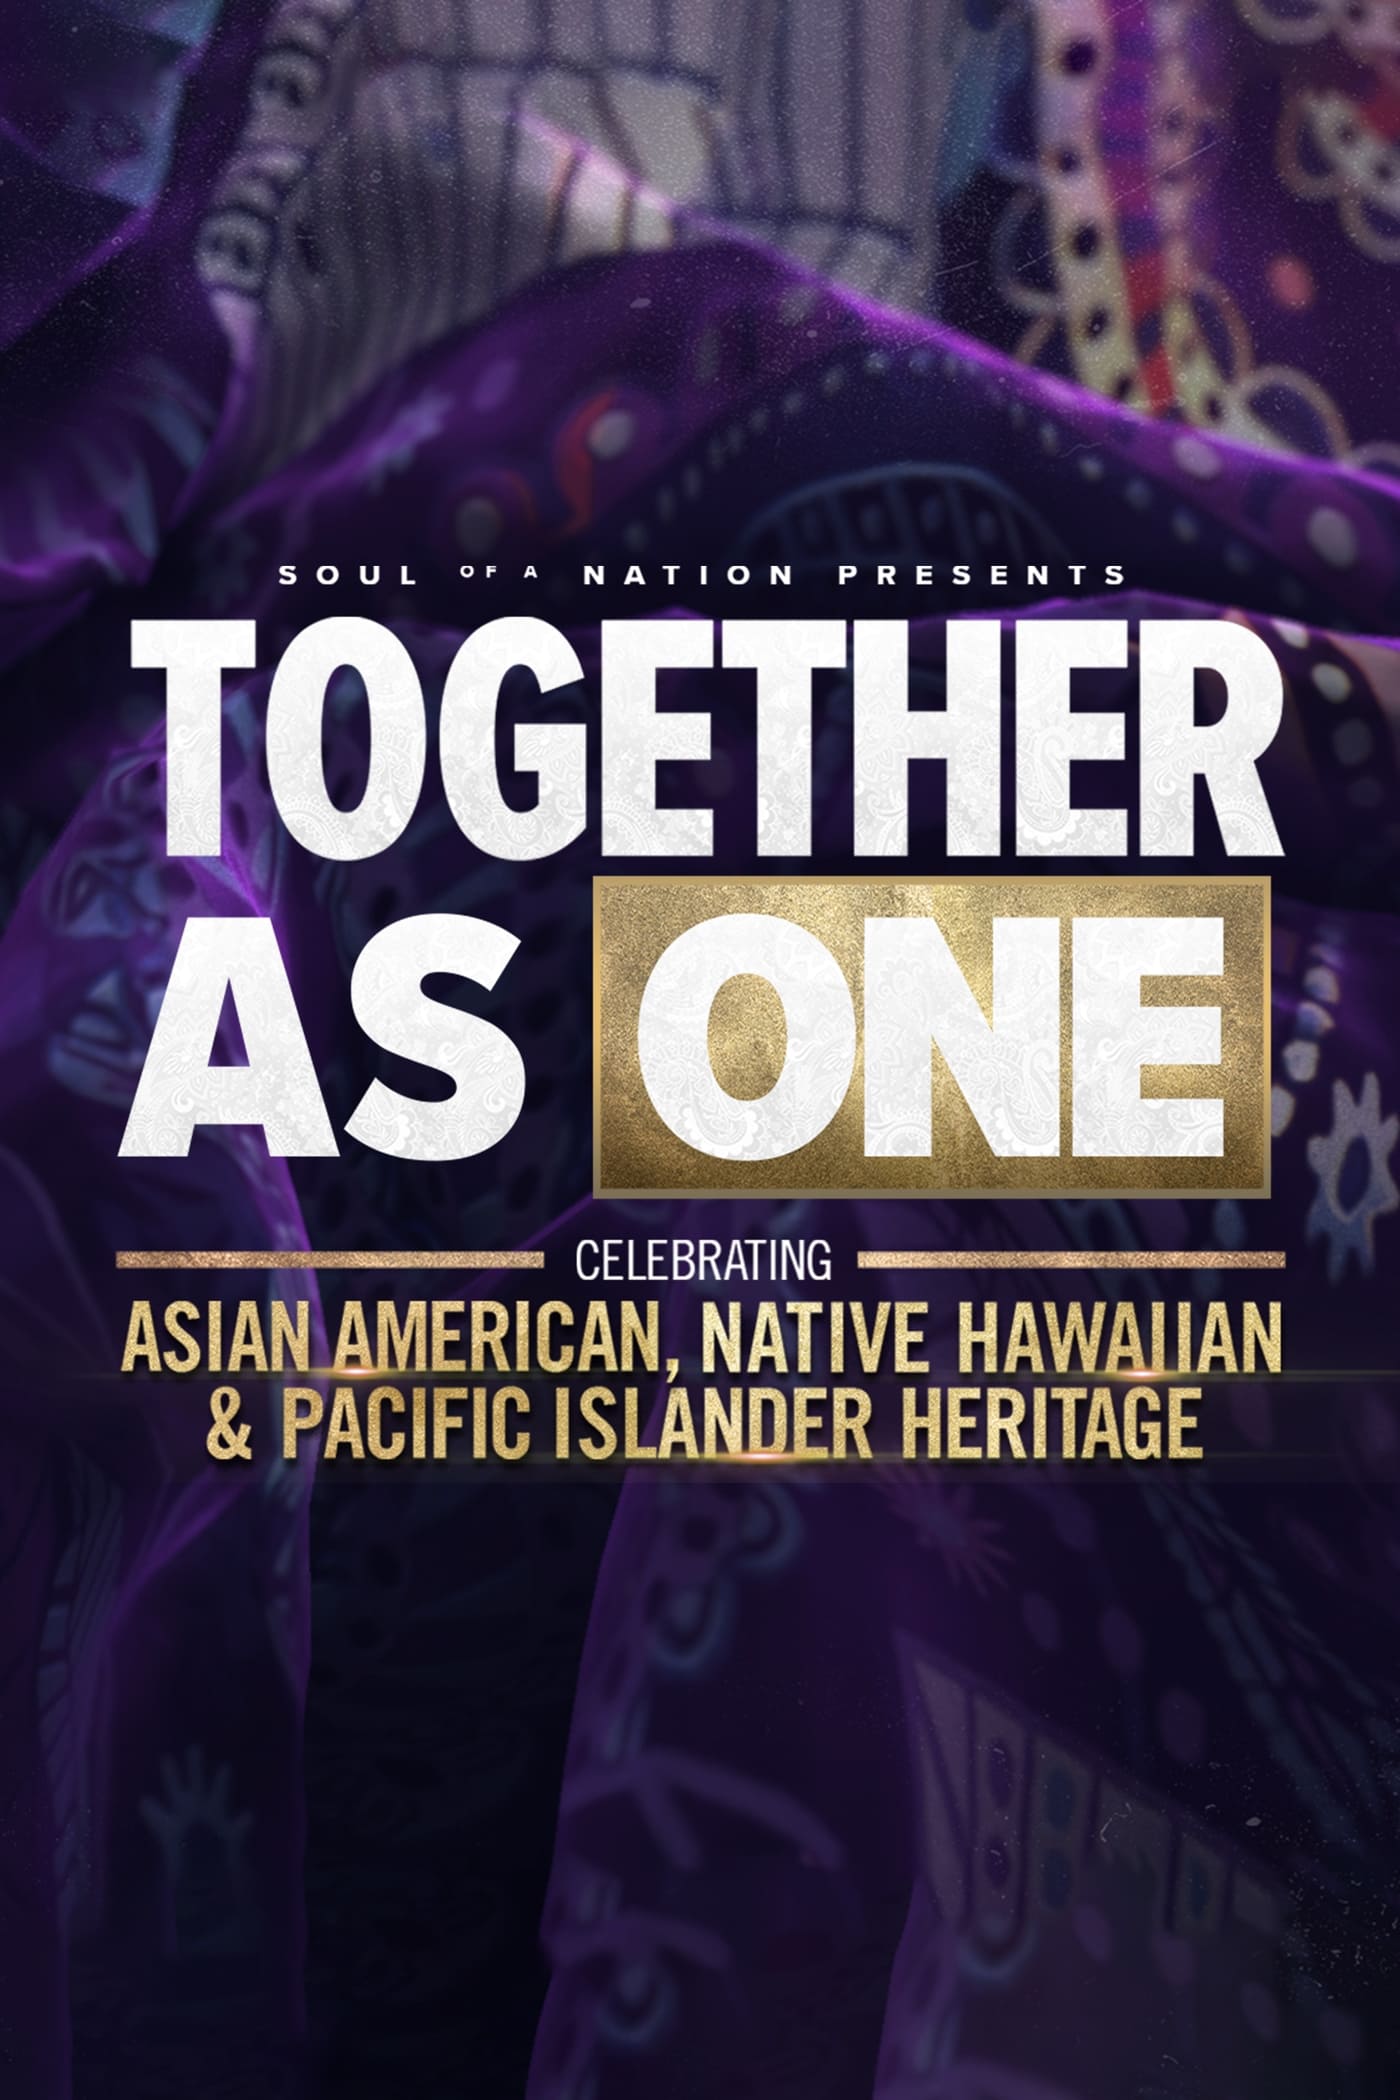 Soul of a Nation Presents: Together As One: Celebrating Asian American, Native Hawaiian and Pacific Islander Heritage film